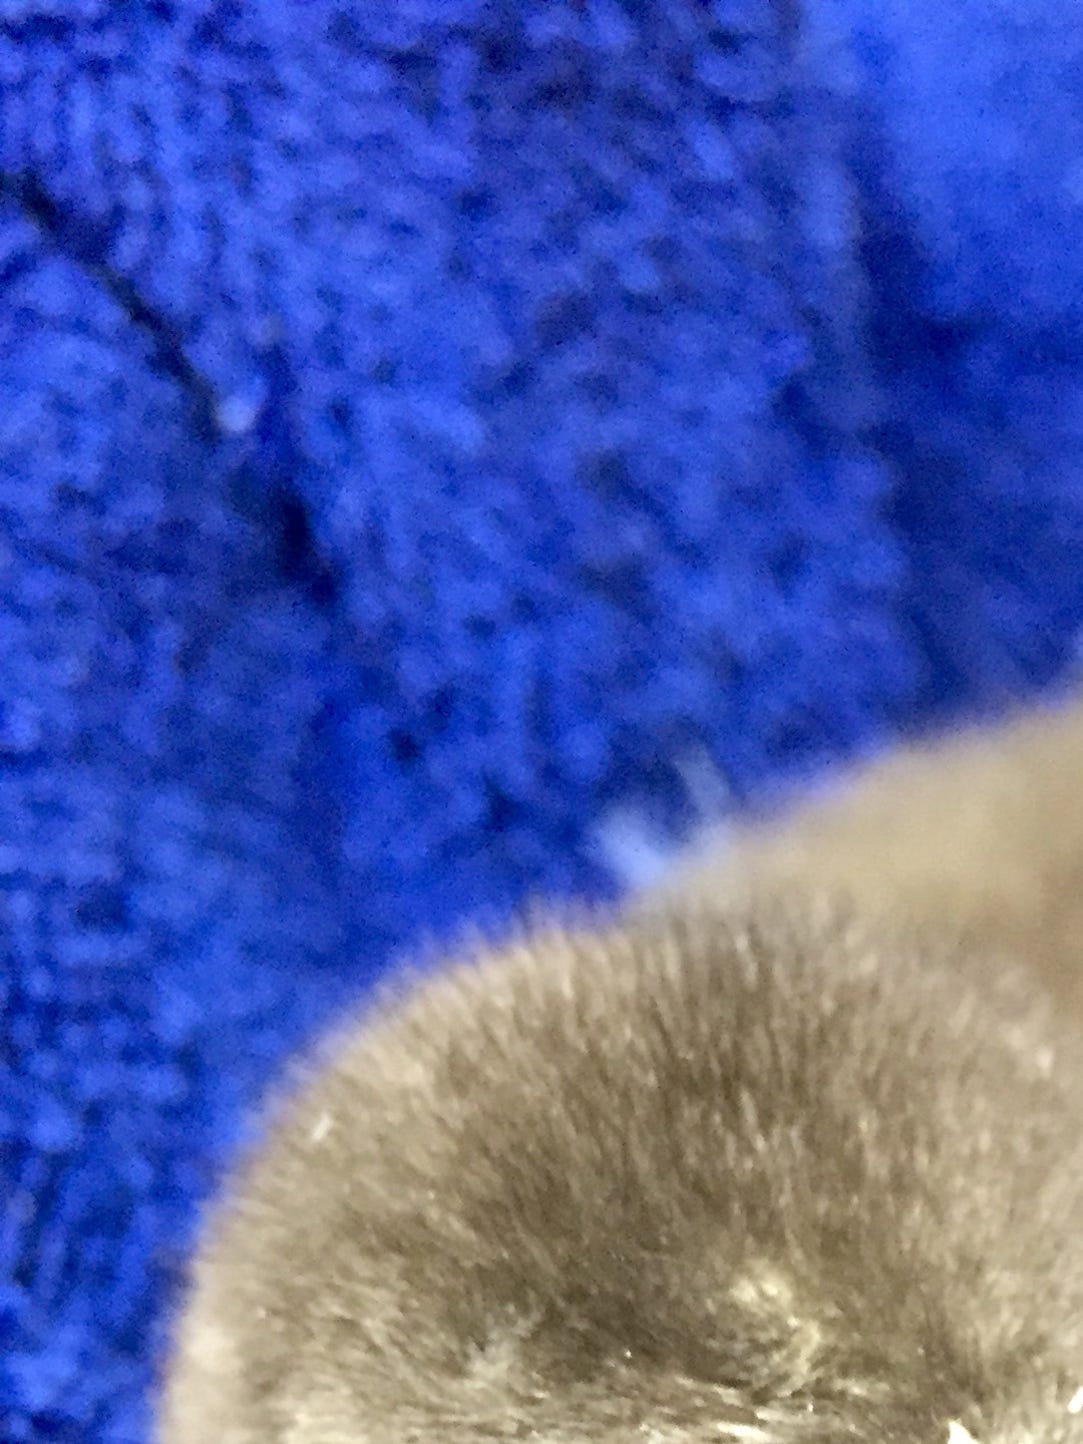 The ninth African Penguin chick was born at Lowry Park